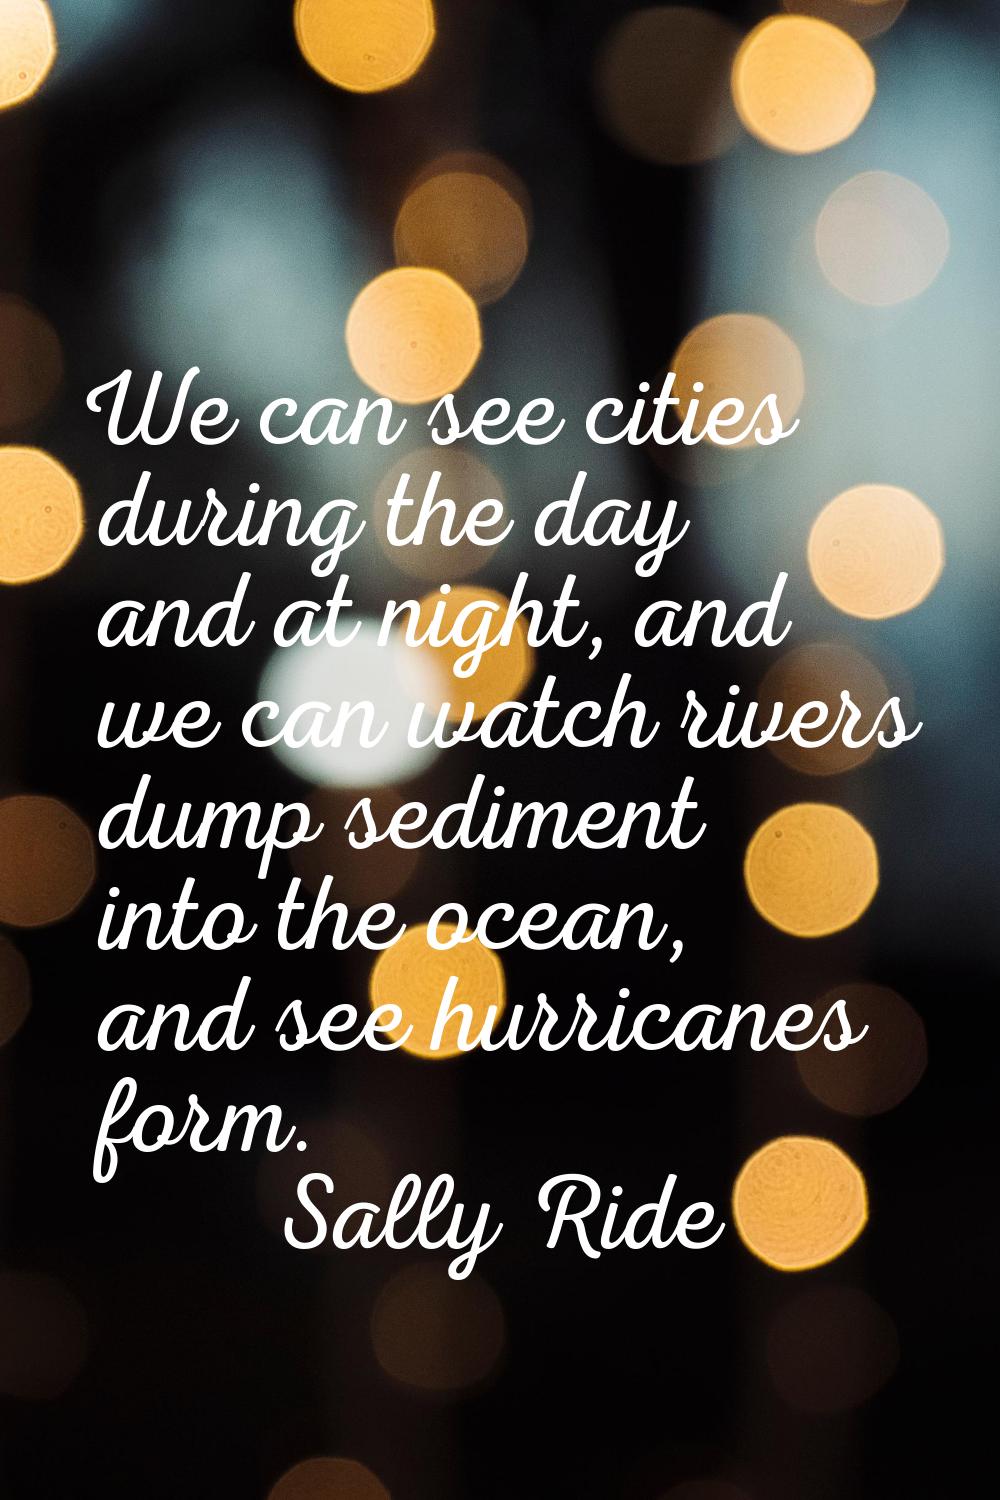 We can see cities during the day and at night, and we can watch rivers dump sediment into the ocean